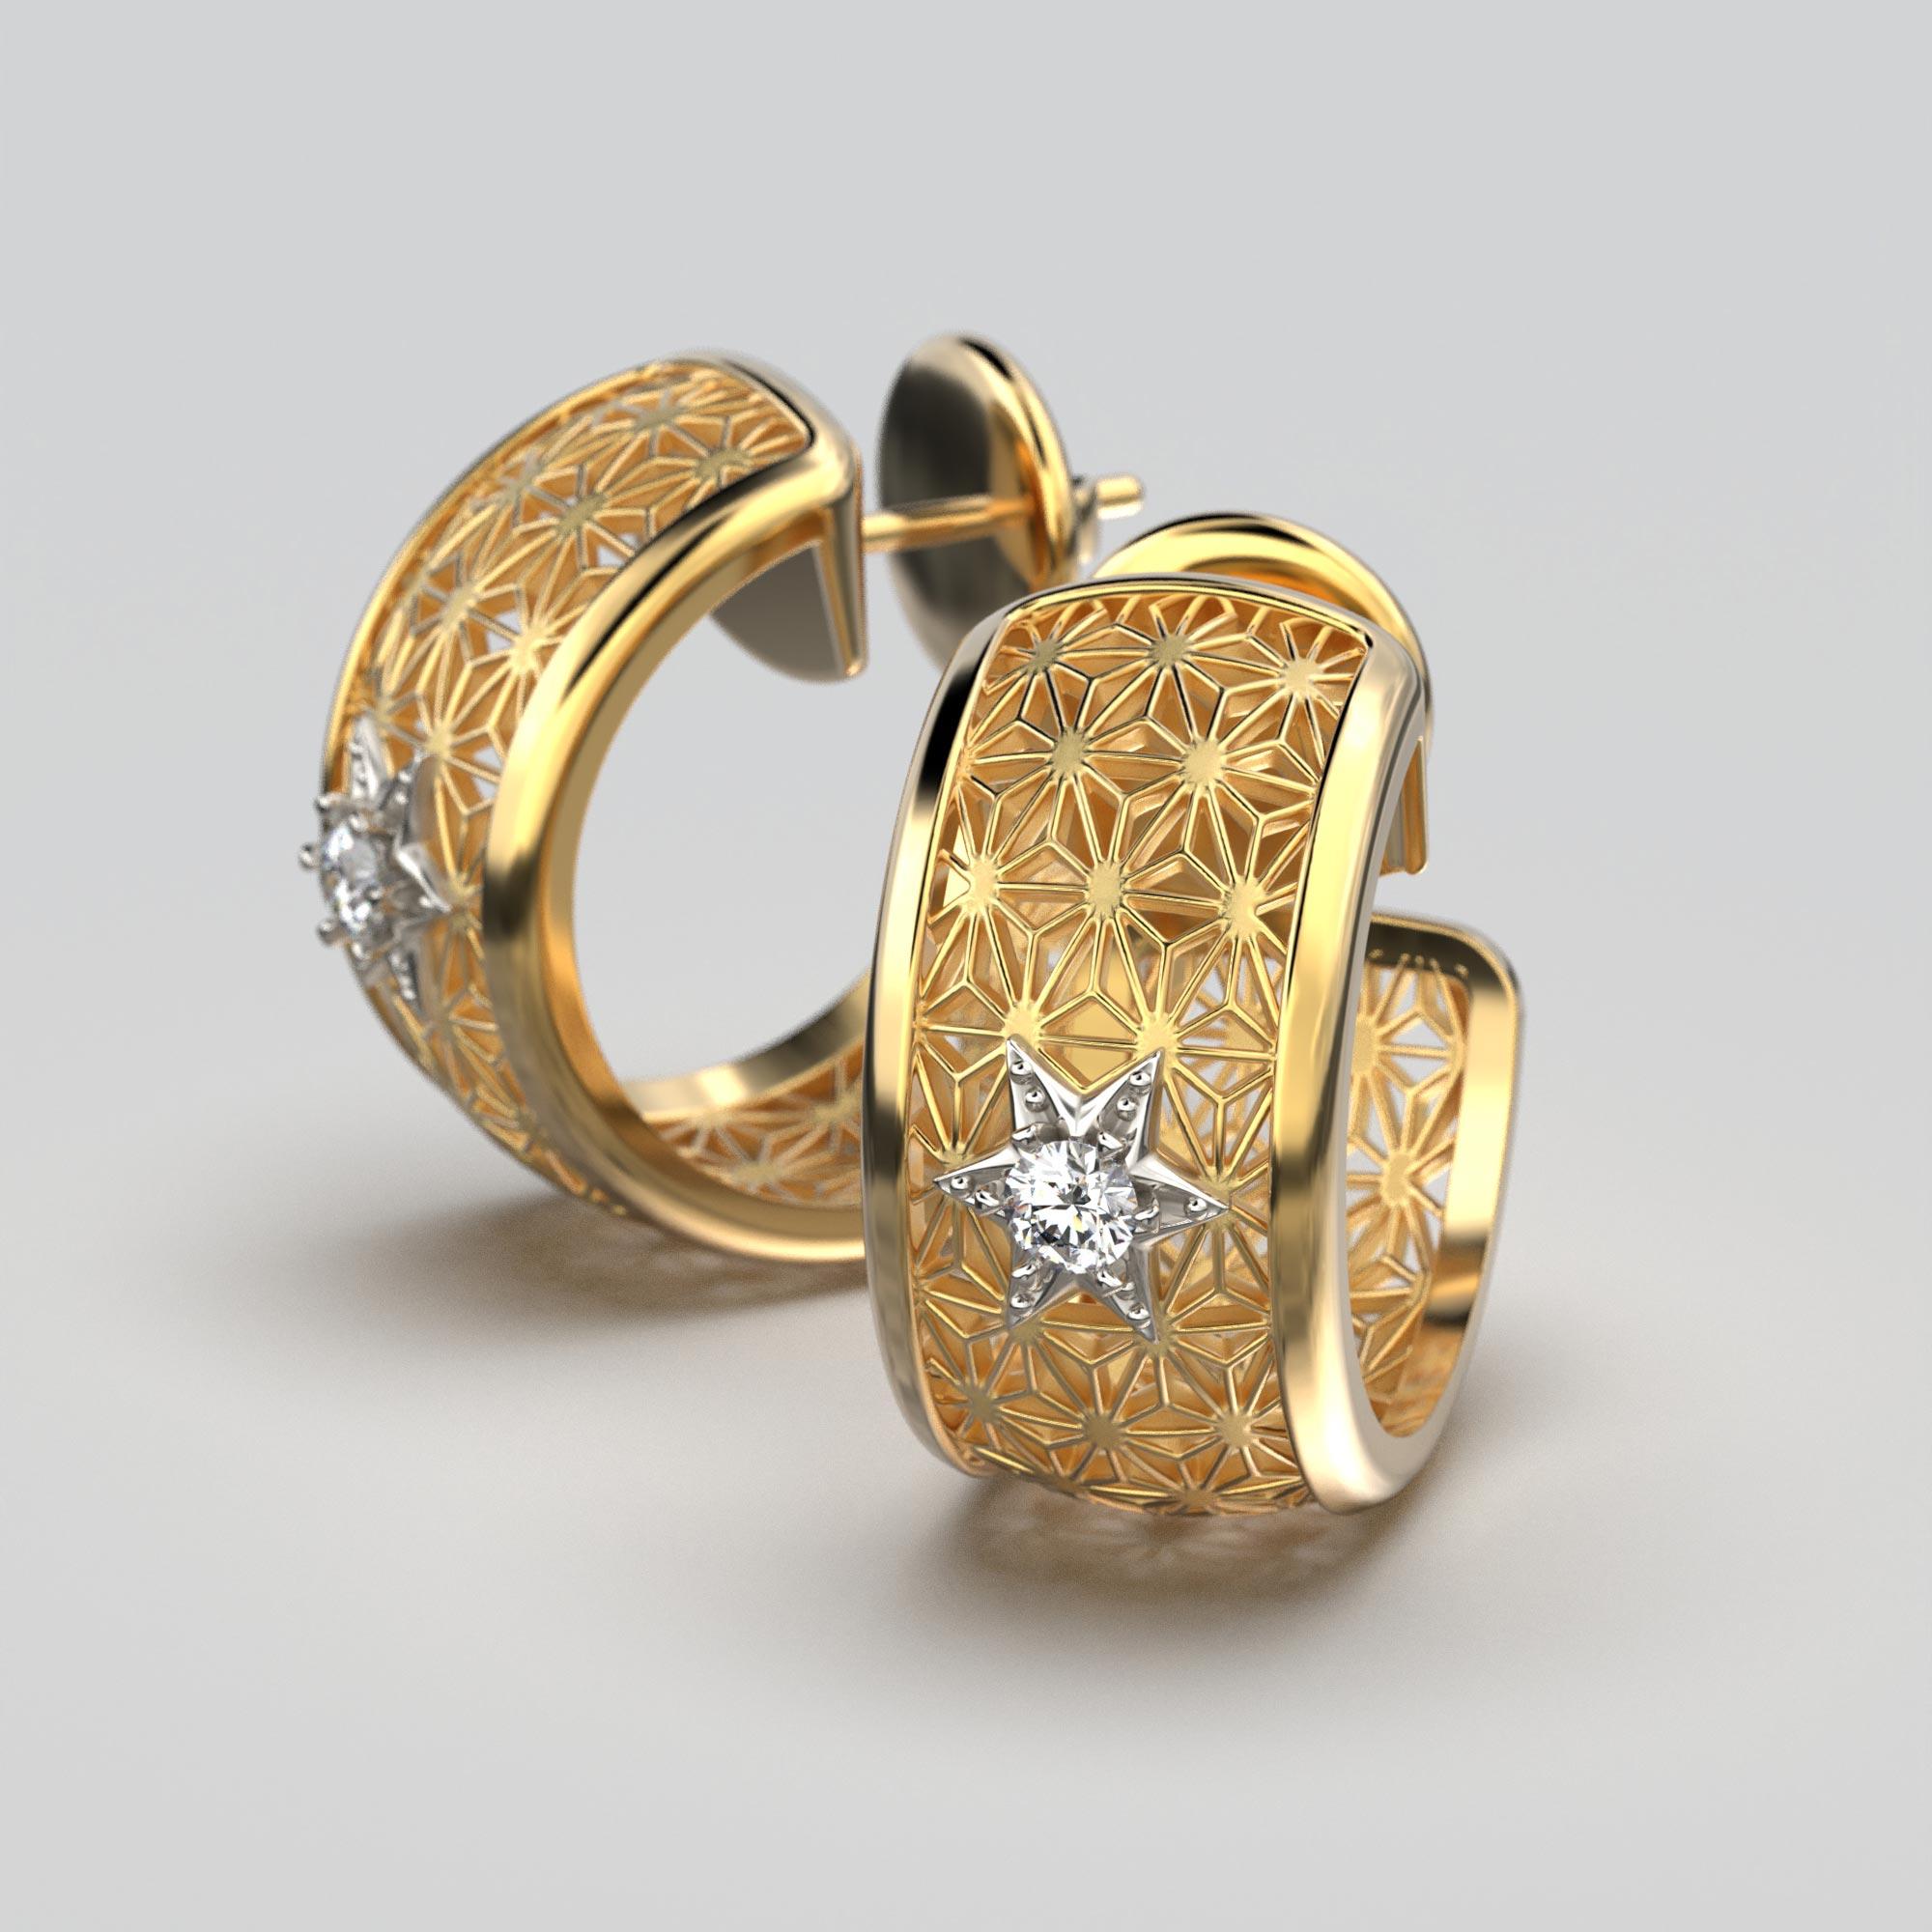 Indulge in Italian craftsmanship with our made to order stunning 18k Gold Open Hoop Earrings. Expertly crafted in two luxurious gold tones, these earrings boast a mesmerizing Japanese Sashiko star pattern, accentuated by two natural 3mm diamonds